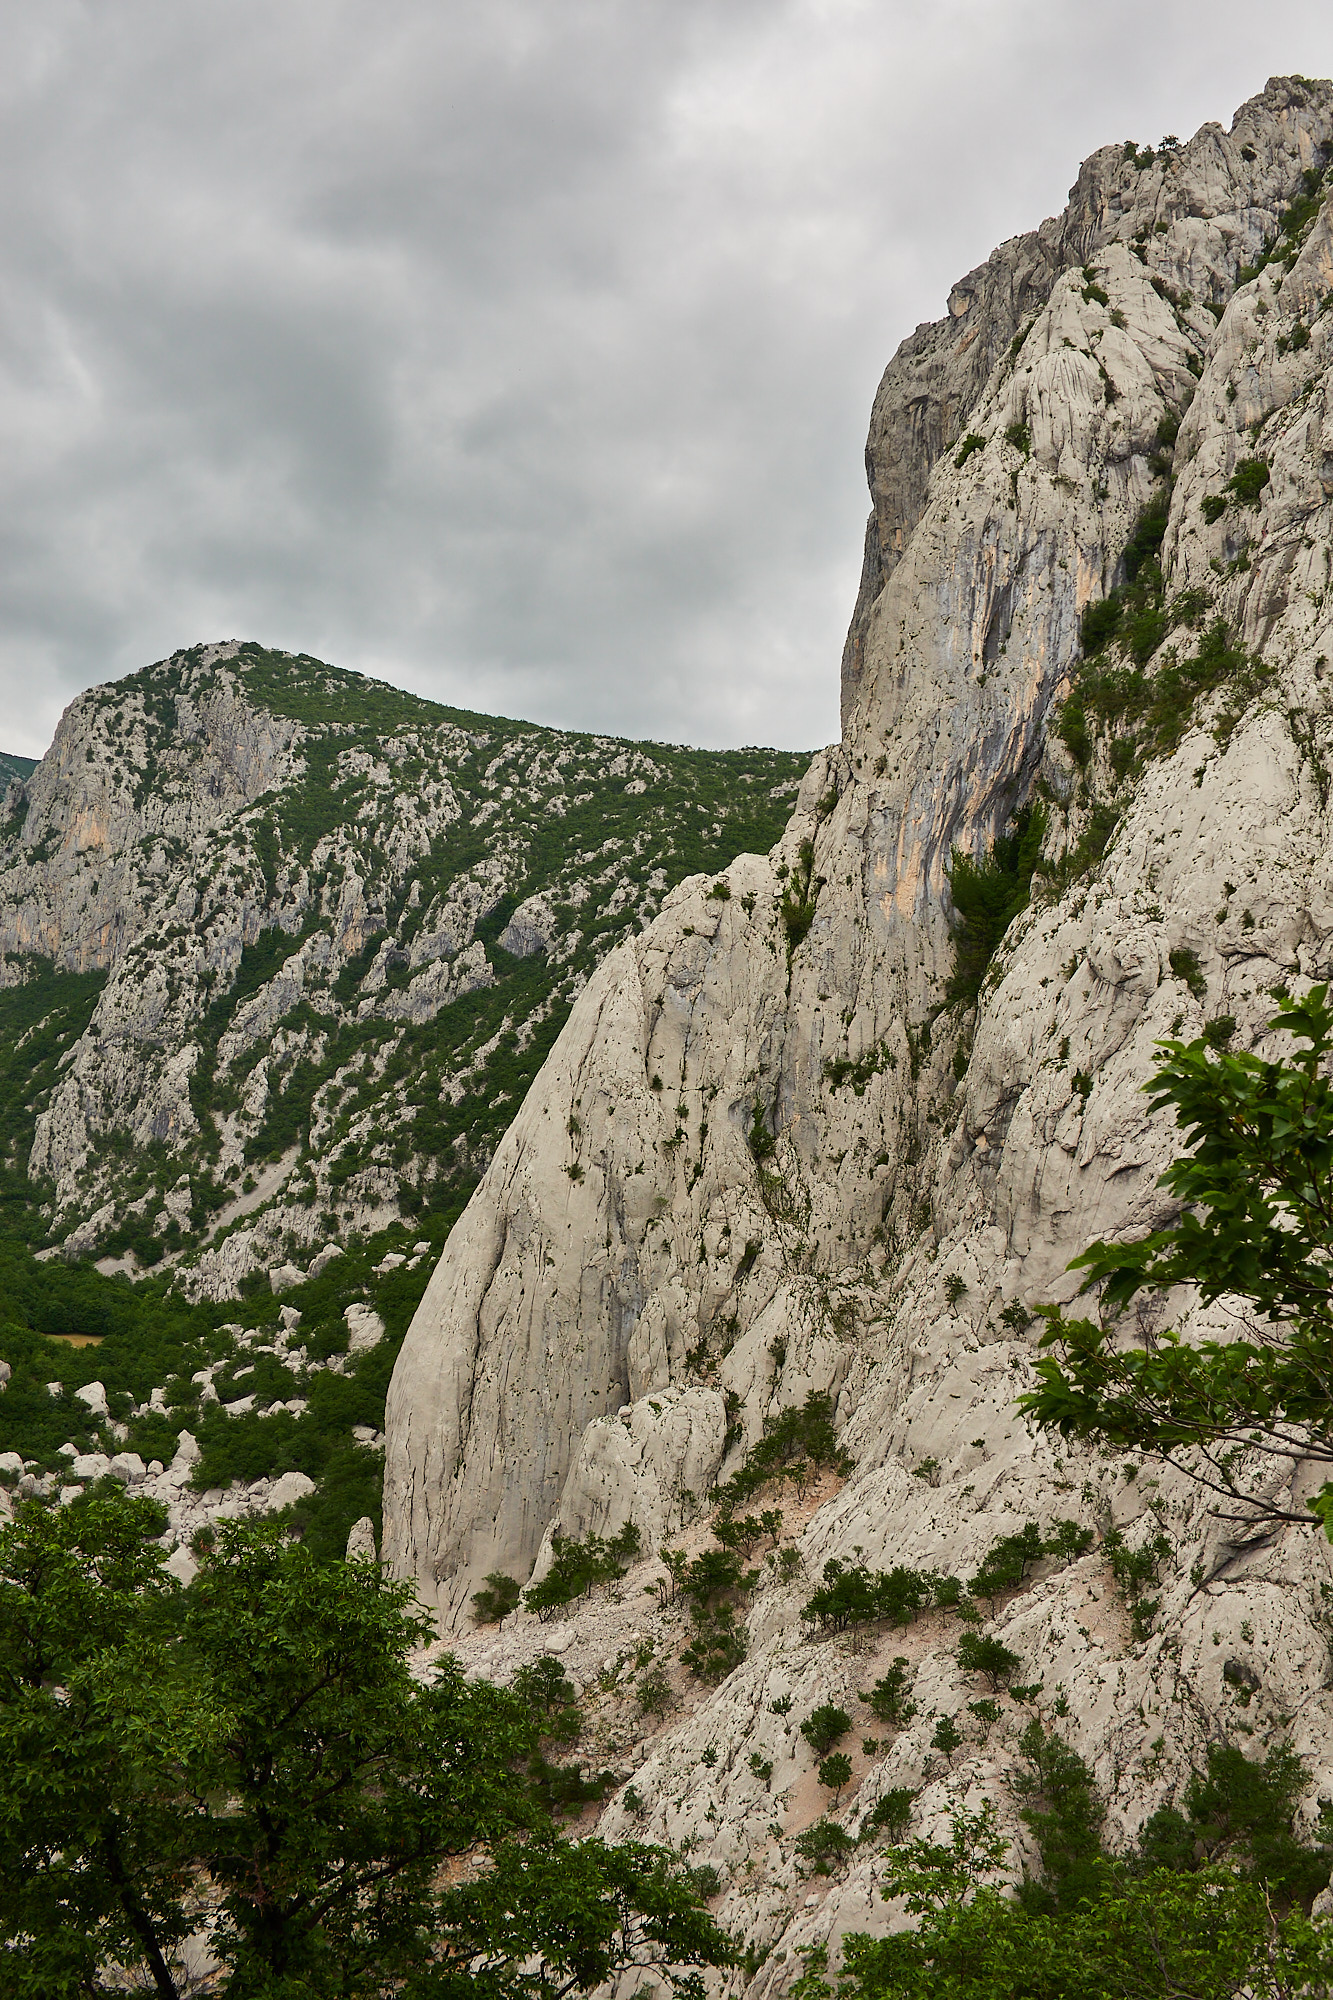 A view of a large limestone buttress called Stup on Anica Kuk in the Paklenica gorge in Croatia